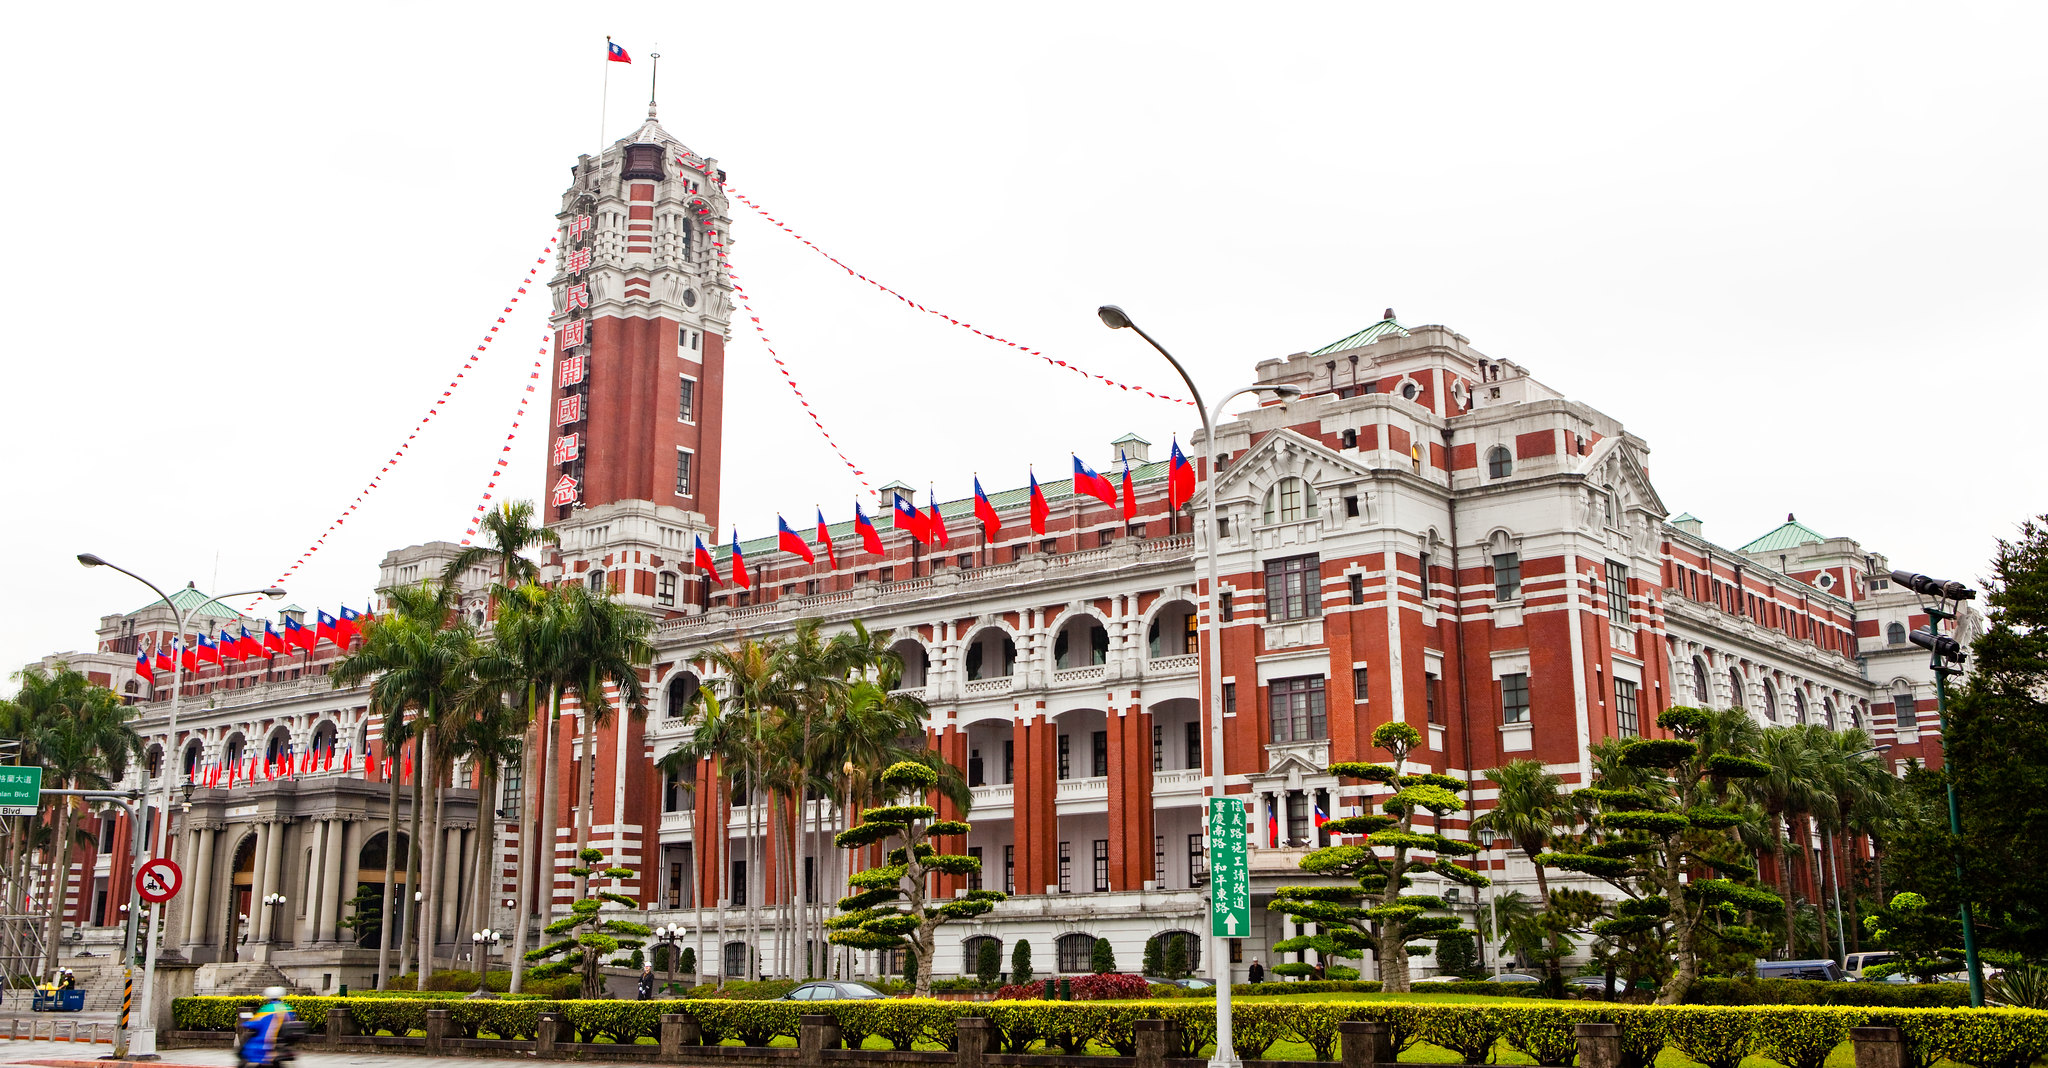 The Taiwanese presidential office building in Taipei. © LH Wong / Flickr